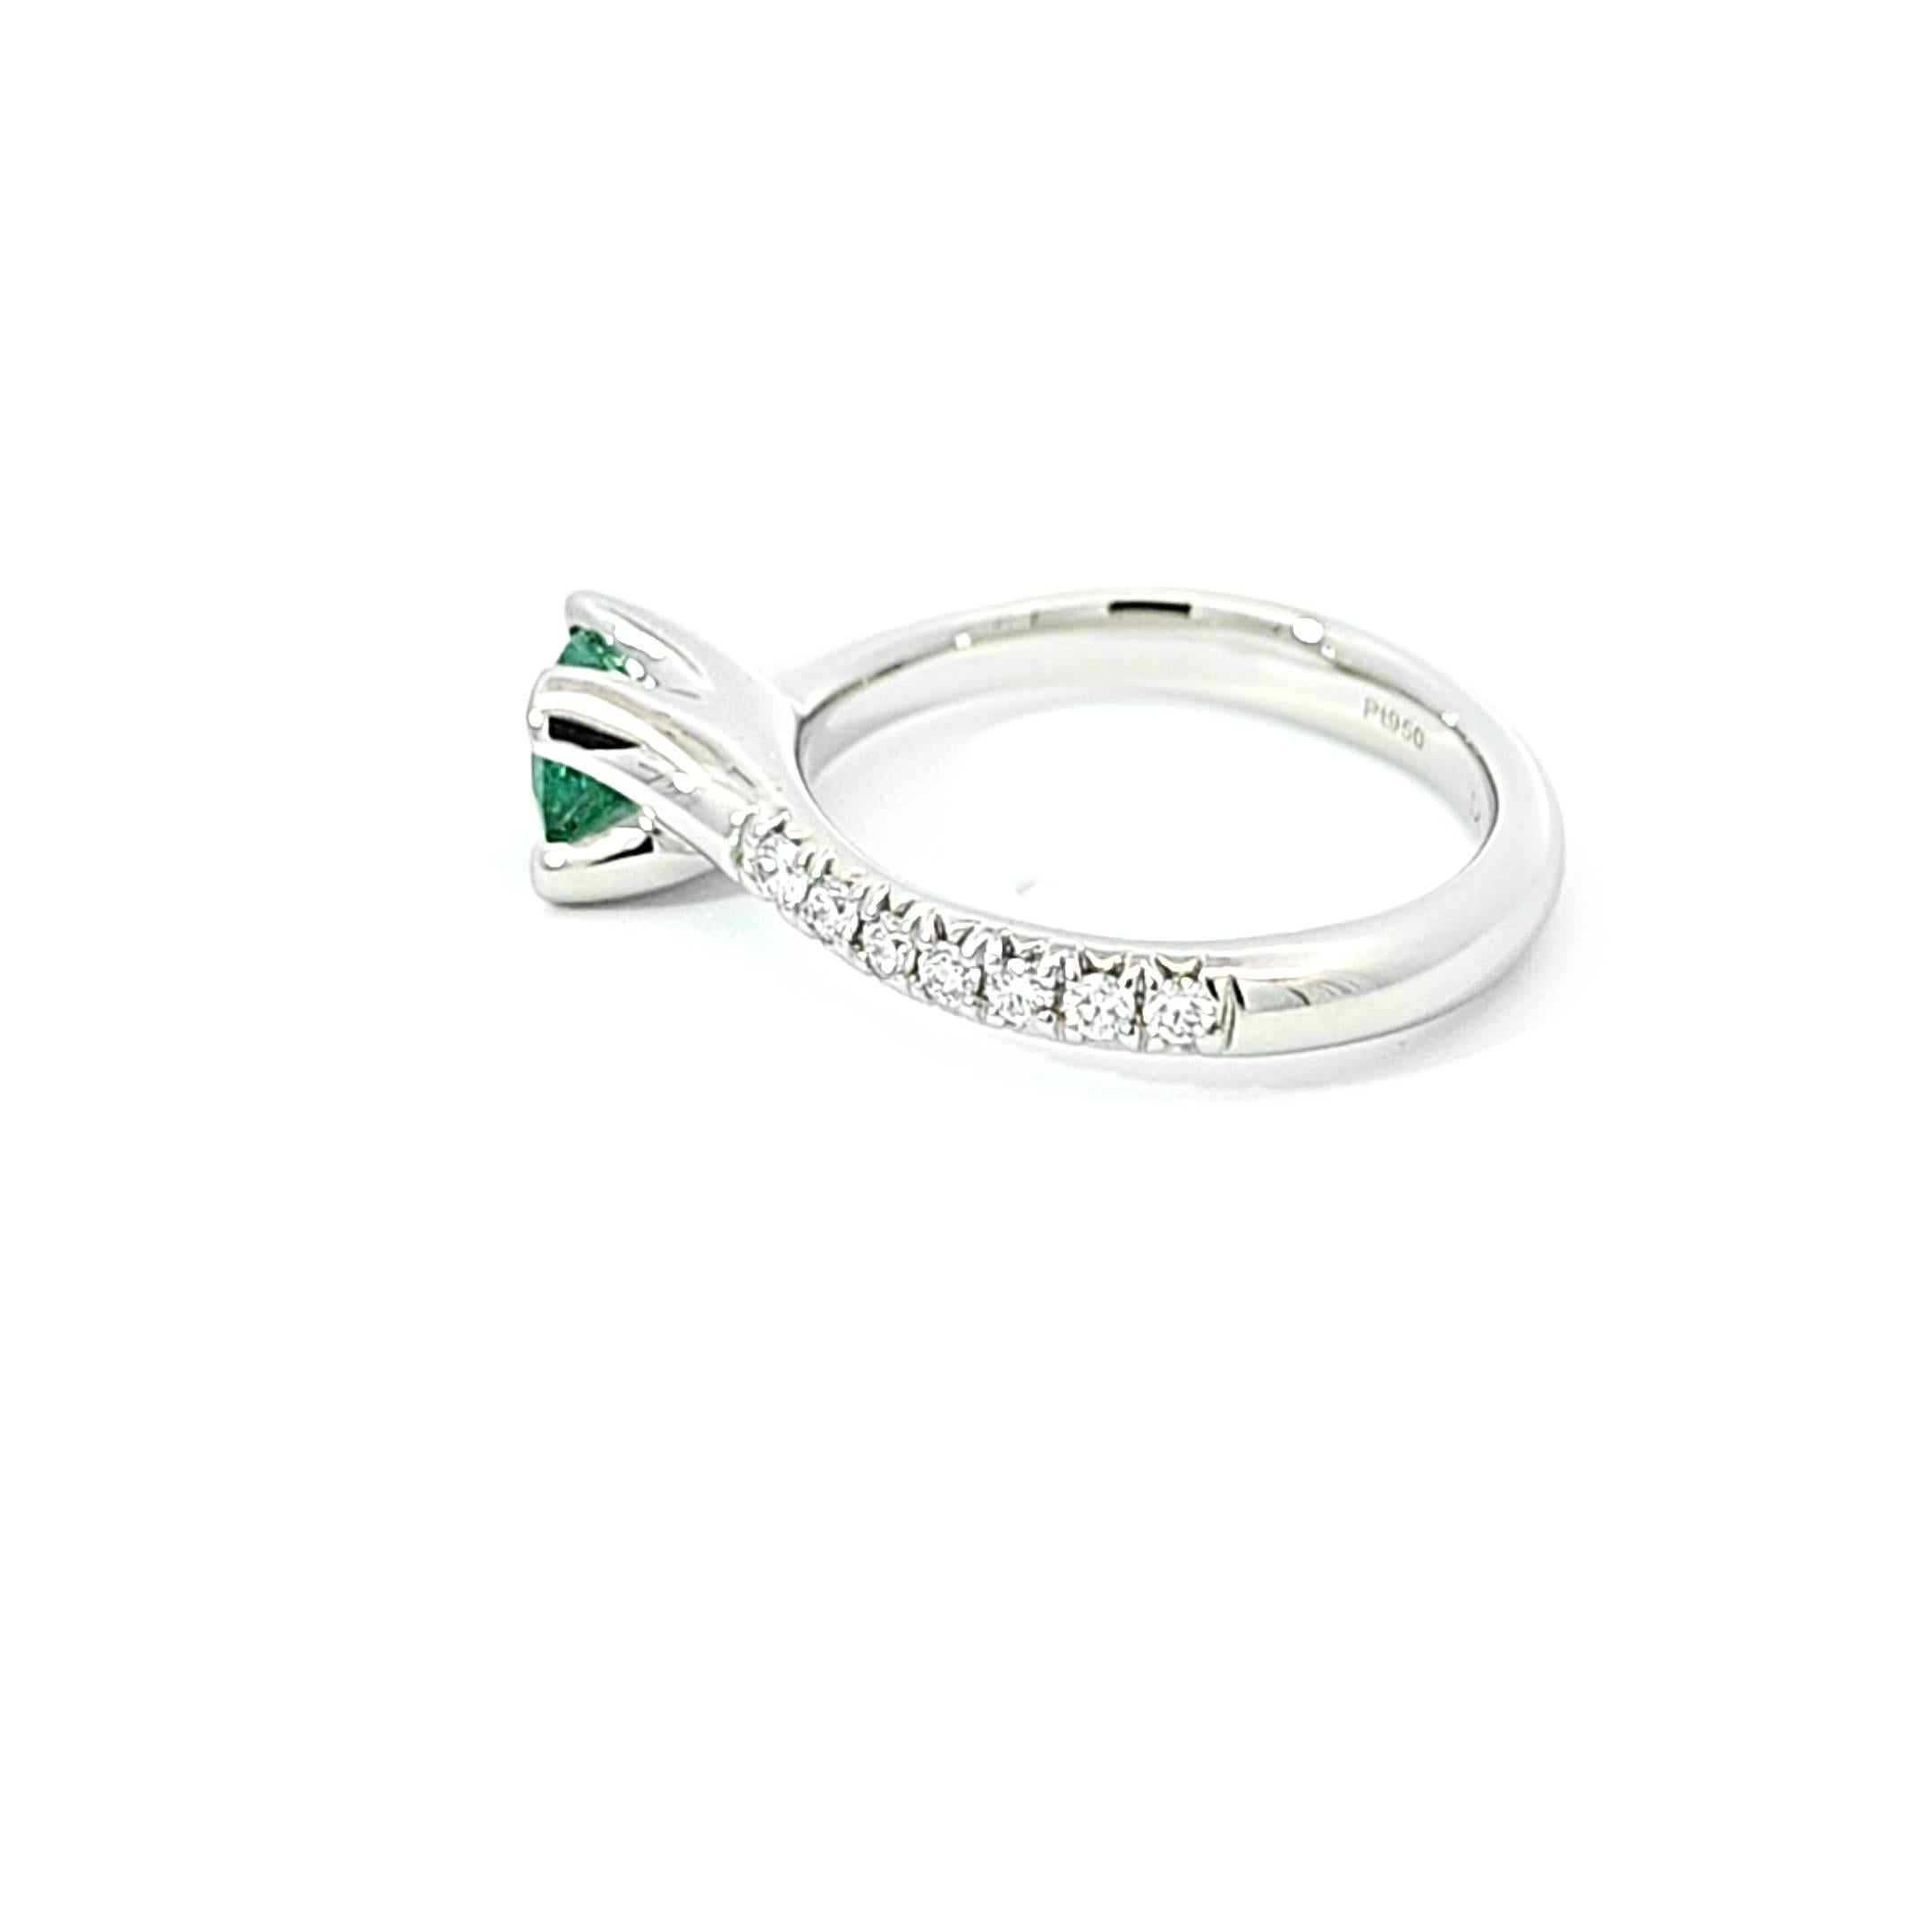 This striking platinum ring pays homage to historic elegance with its emerald and diamond adornments. The resplendent center emerald displays the entrancing green that has captivated royalty and connoisseurs for centuries. Its focal placement honors